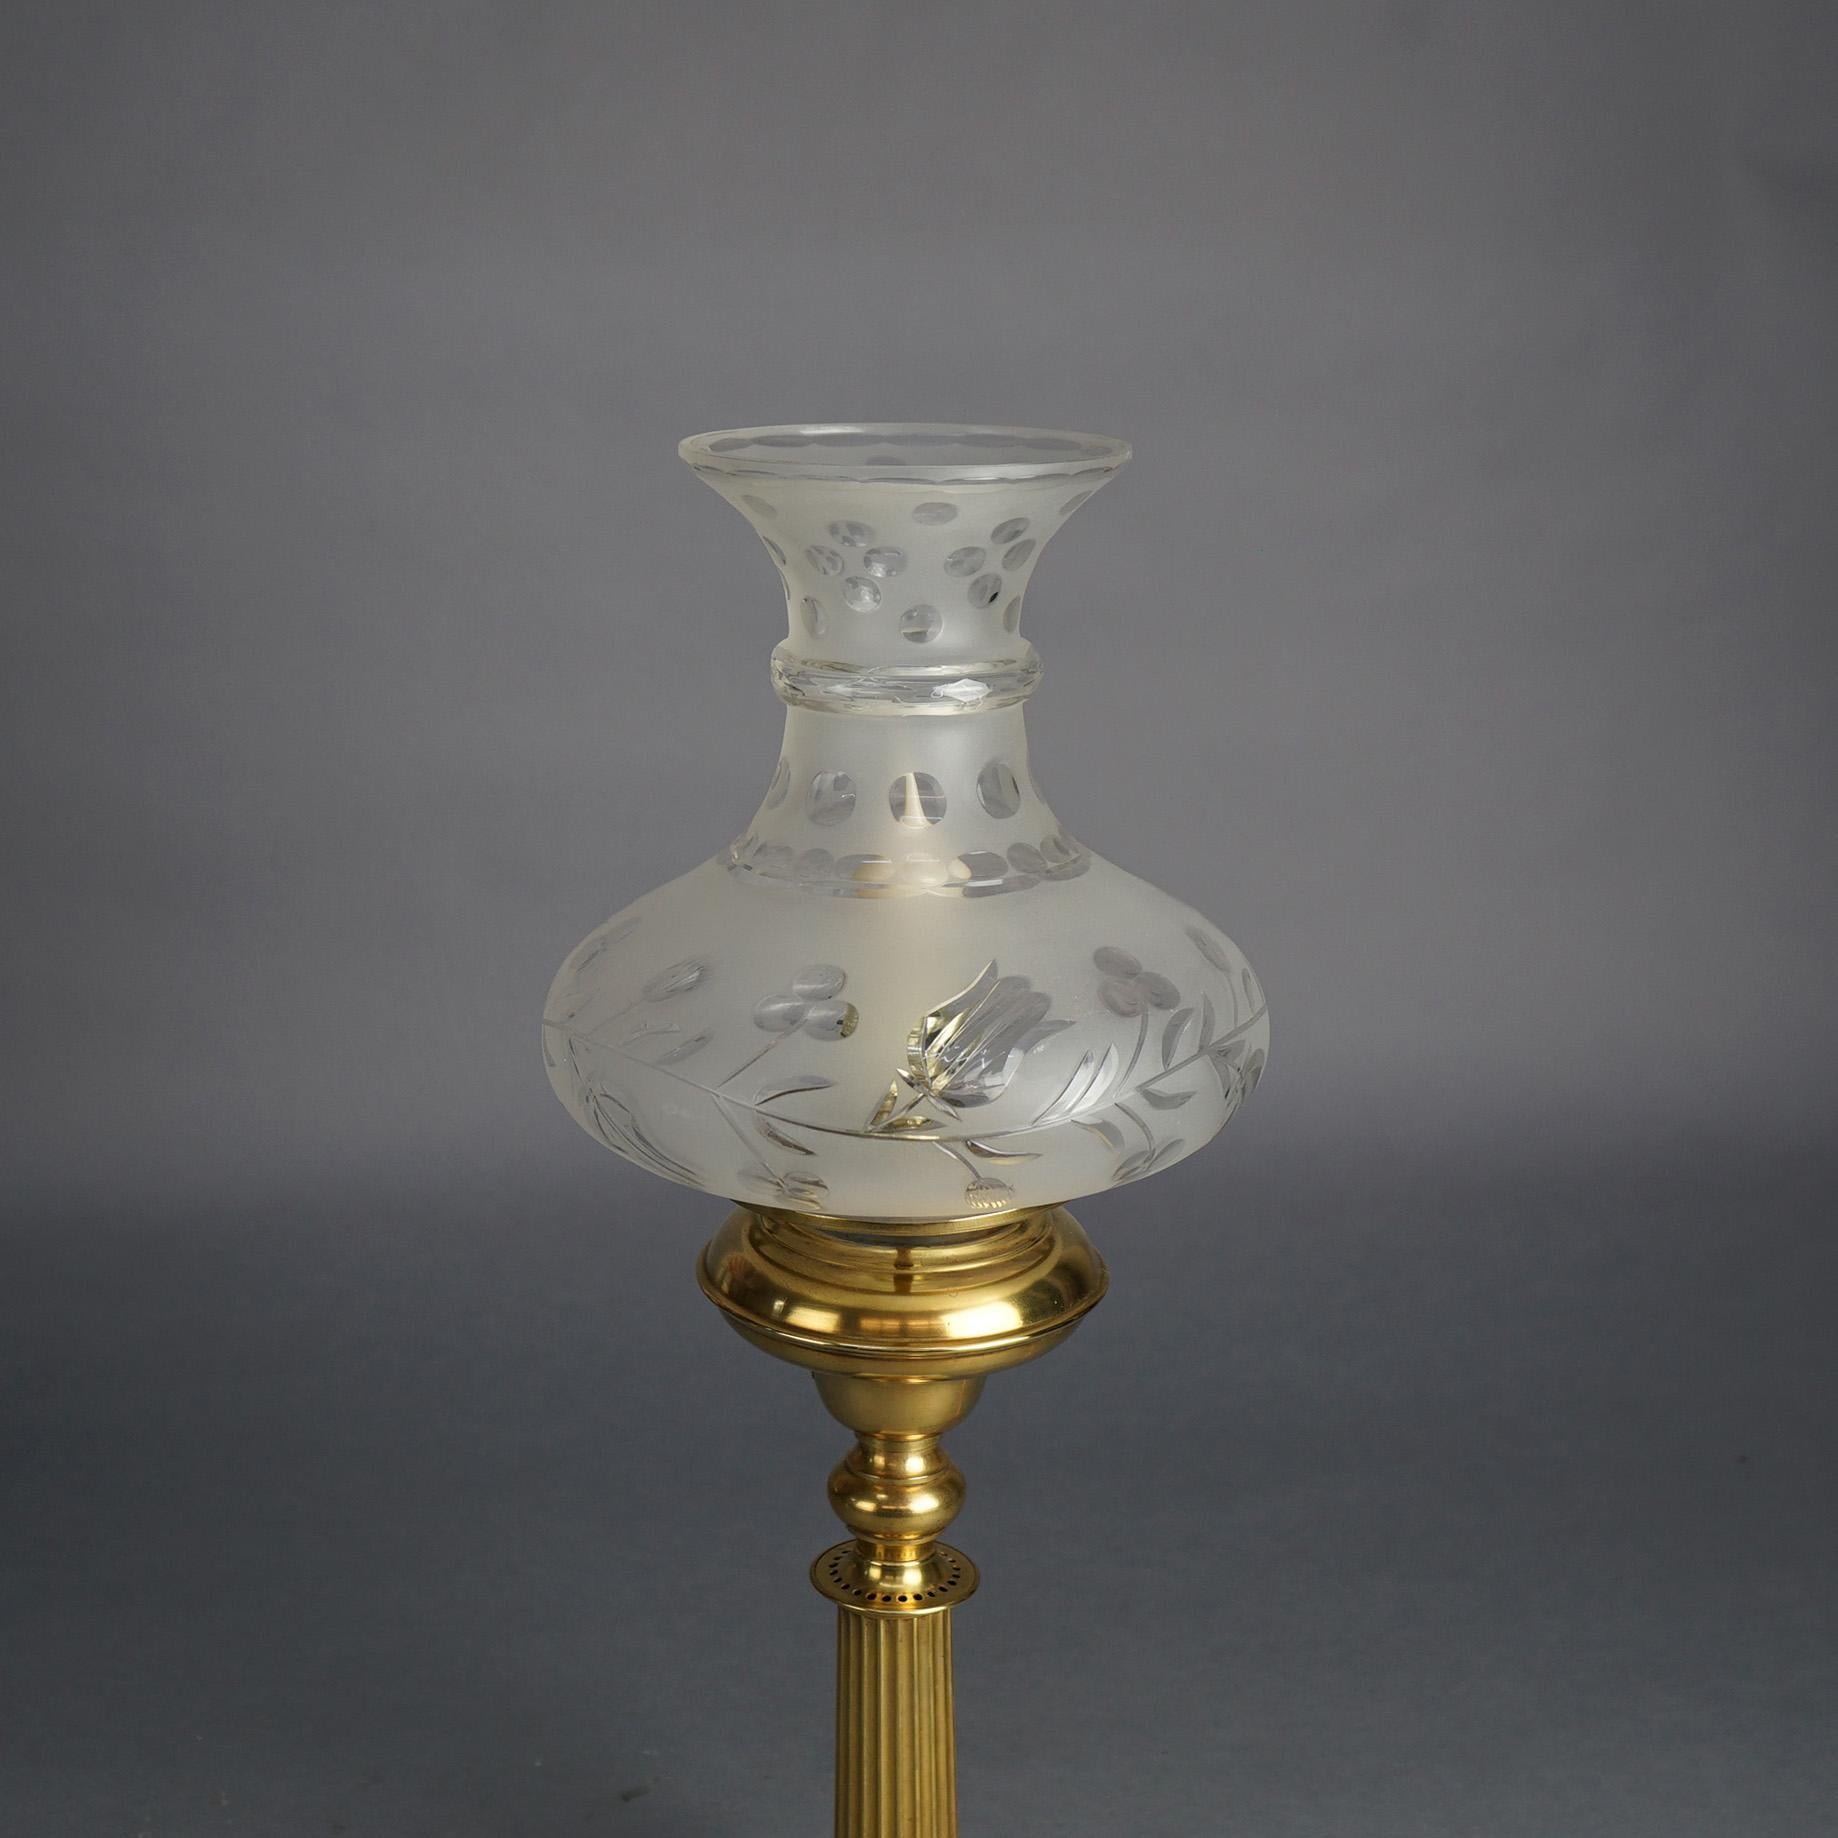 Antique Brass Solar Lamp with Tam-O-Shanter Cut Glass Shade & Marble Base C1840 For Sale 1